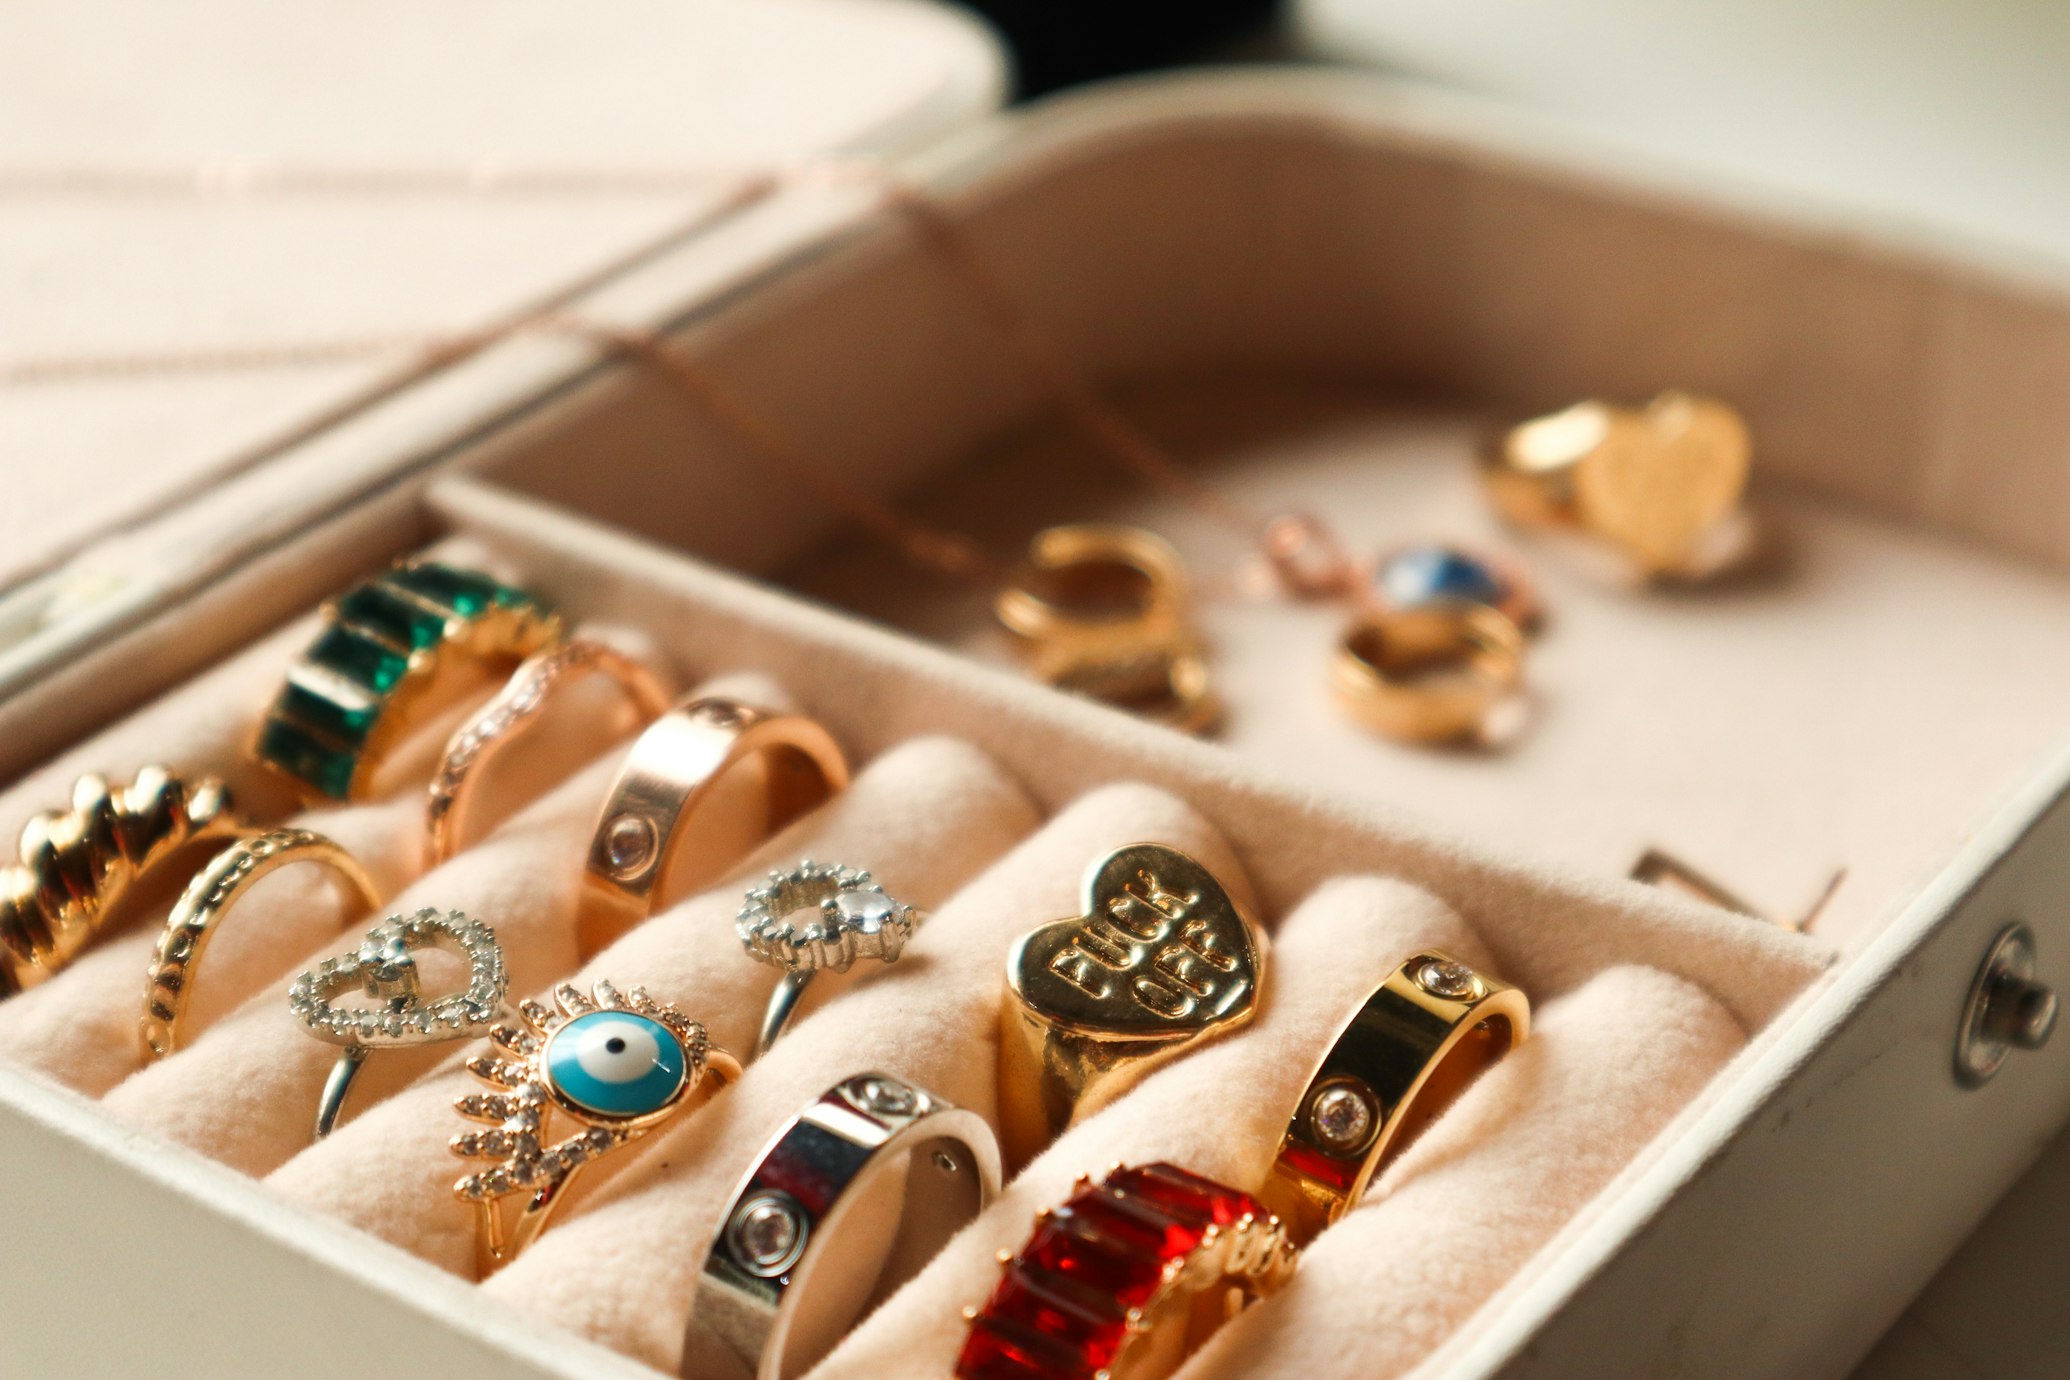 Practices for Storing Jewelry to Prevent Tarnishing and Damage